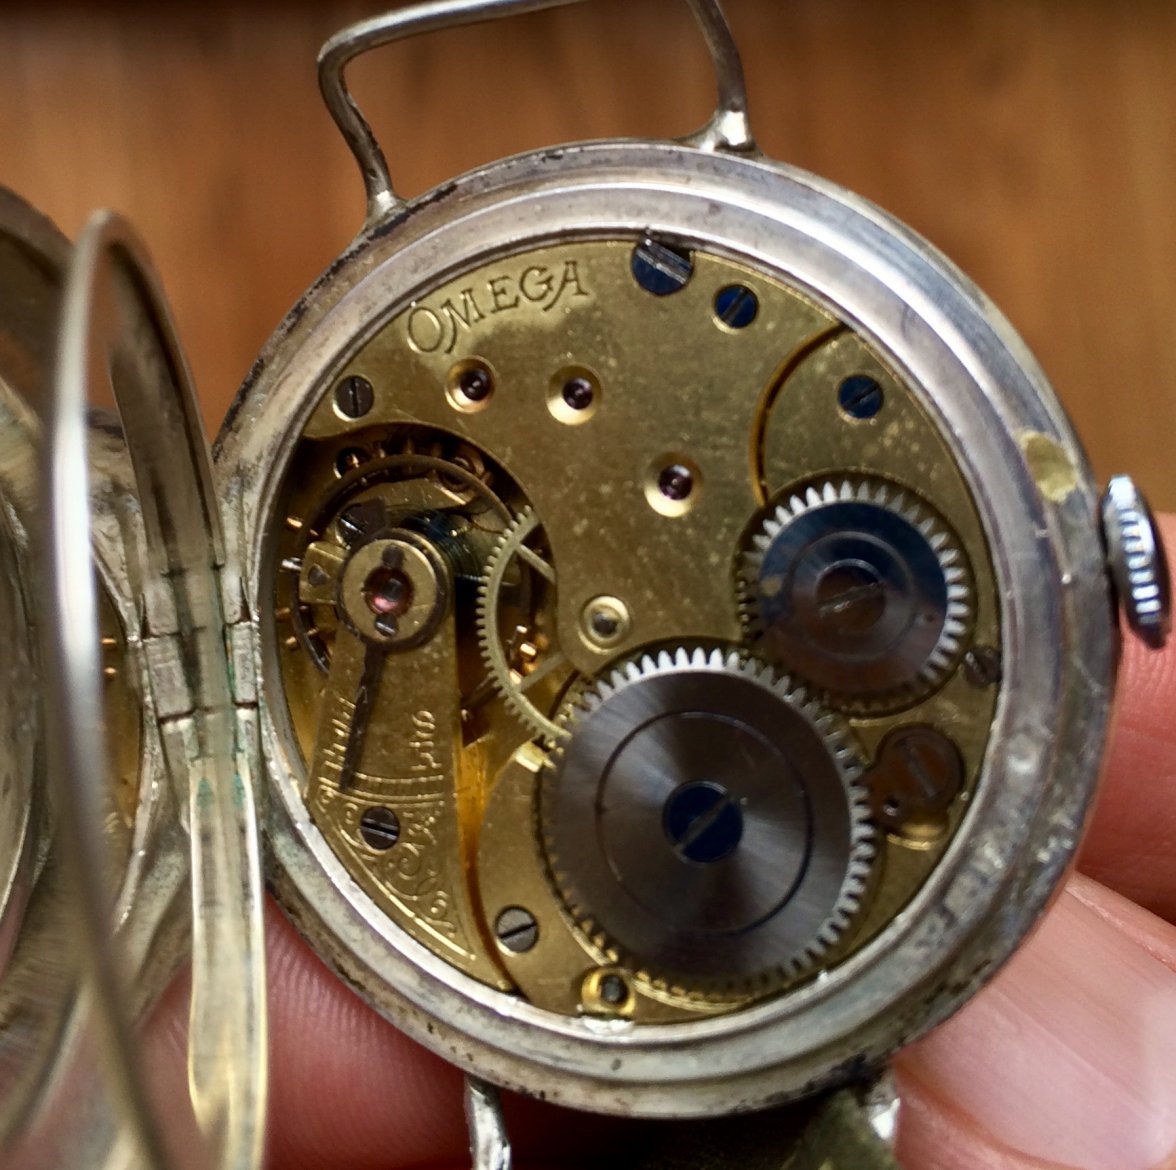 Early Omega Wristwatch? | Omega Forums